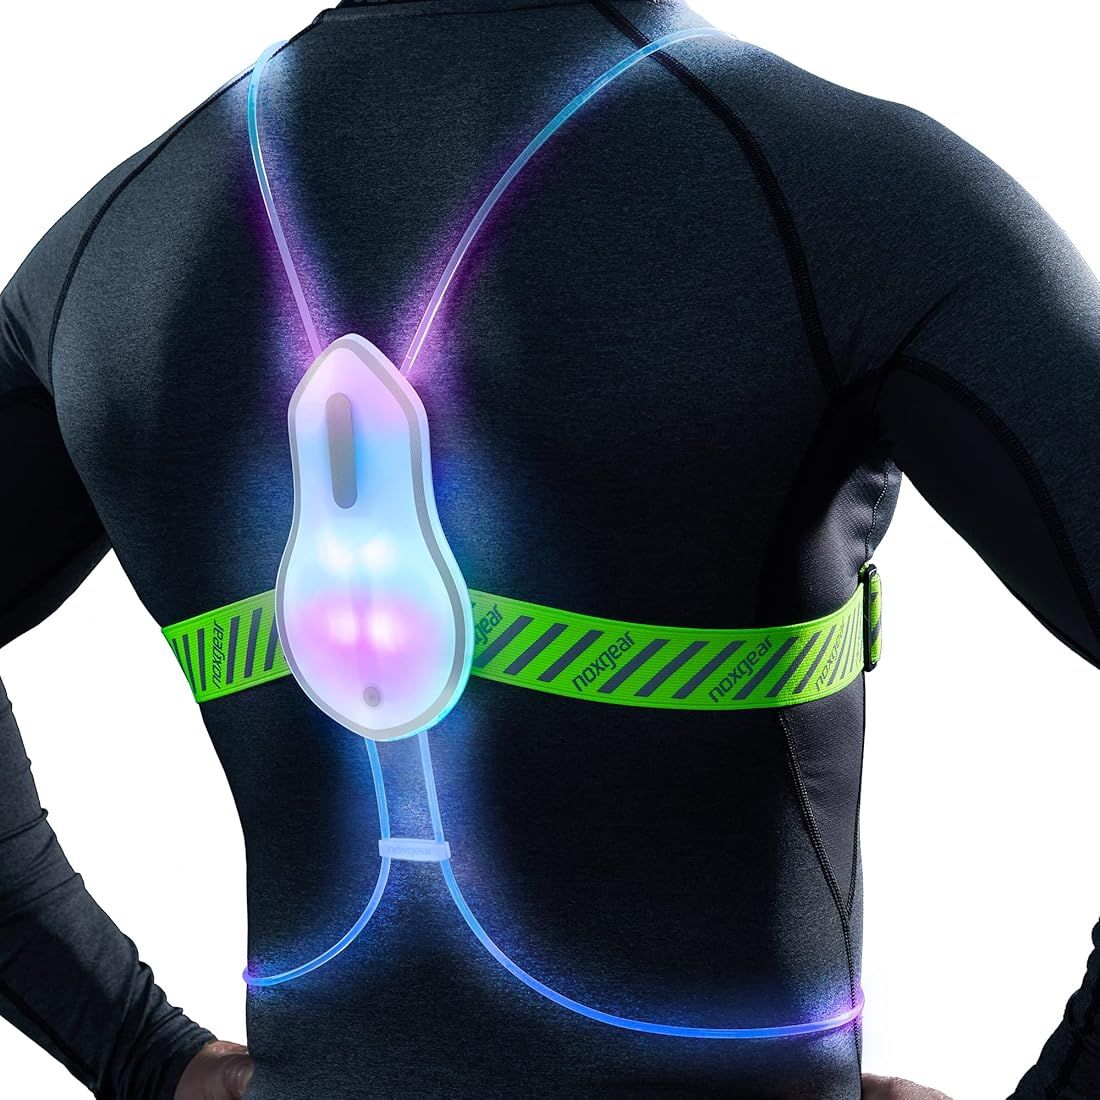 Tracer2 - Multicolor Illuminated, Reflective Vest for Running or Cycling (Rechargeable, Waterproo... | Amazon (US)